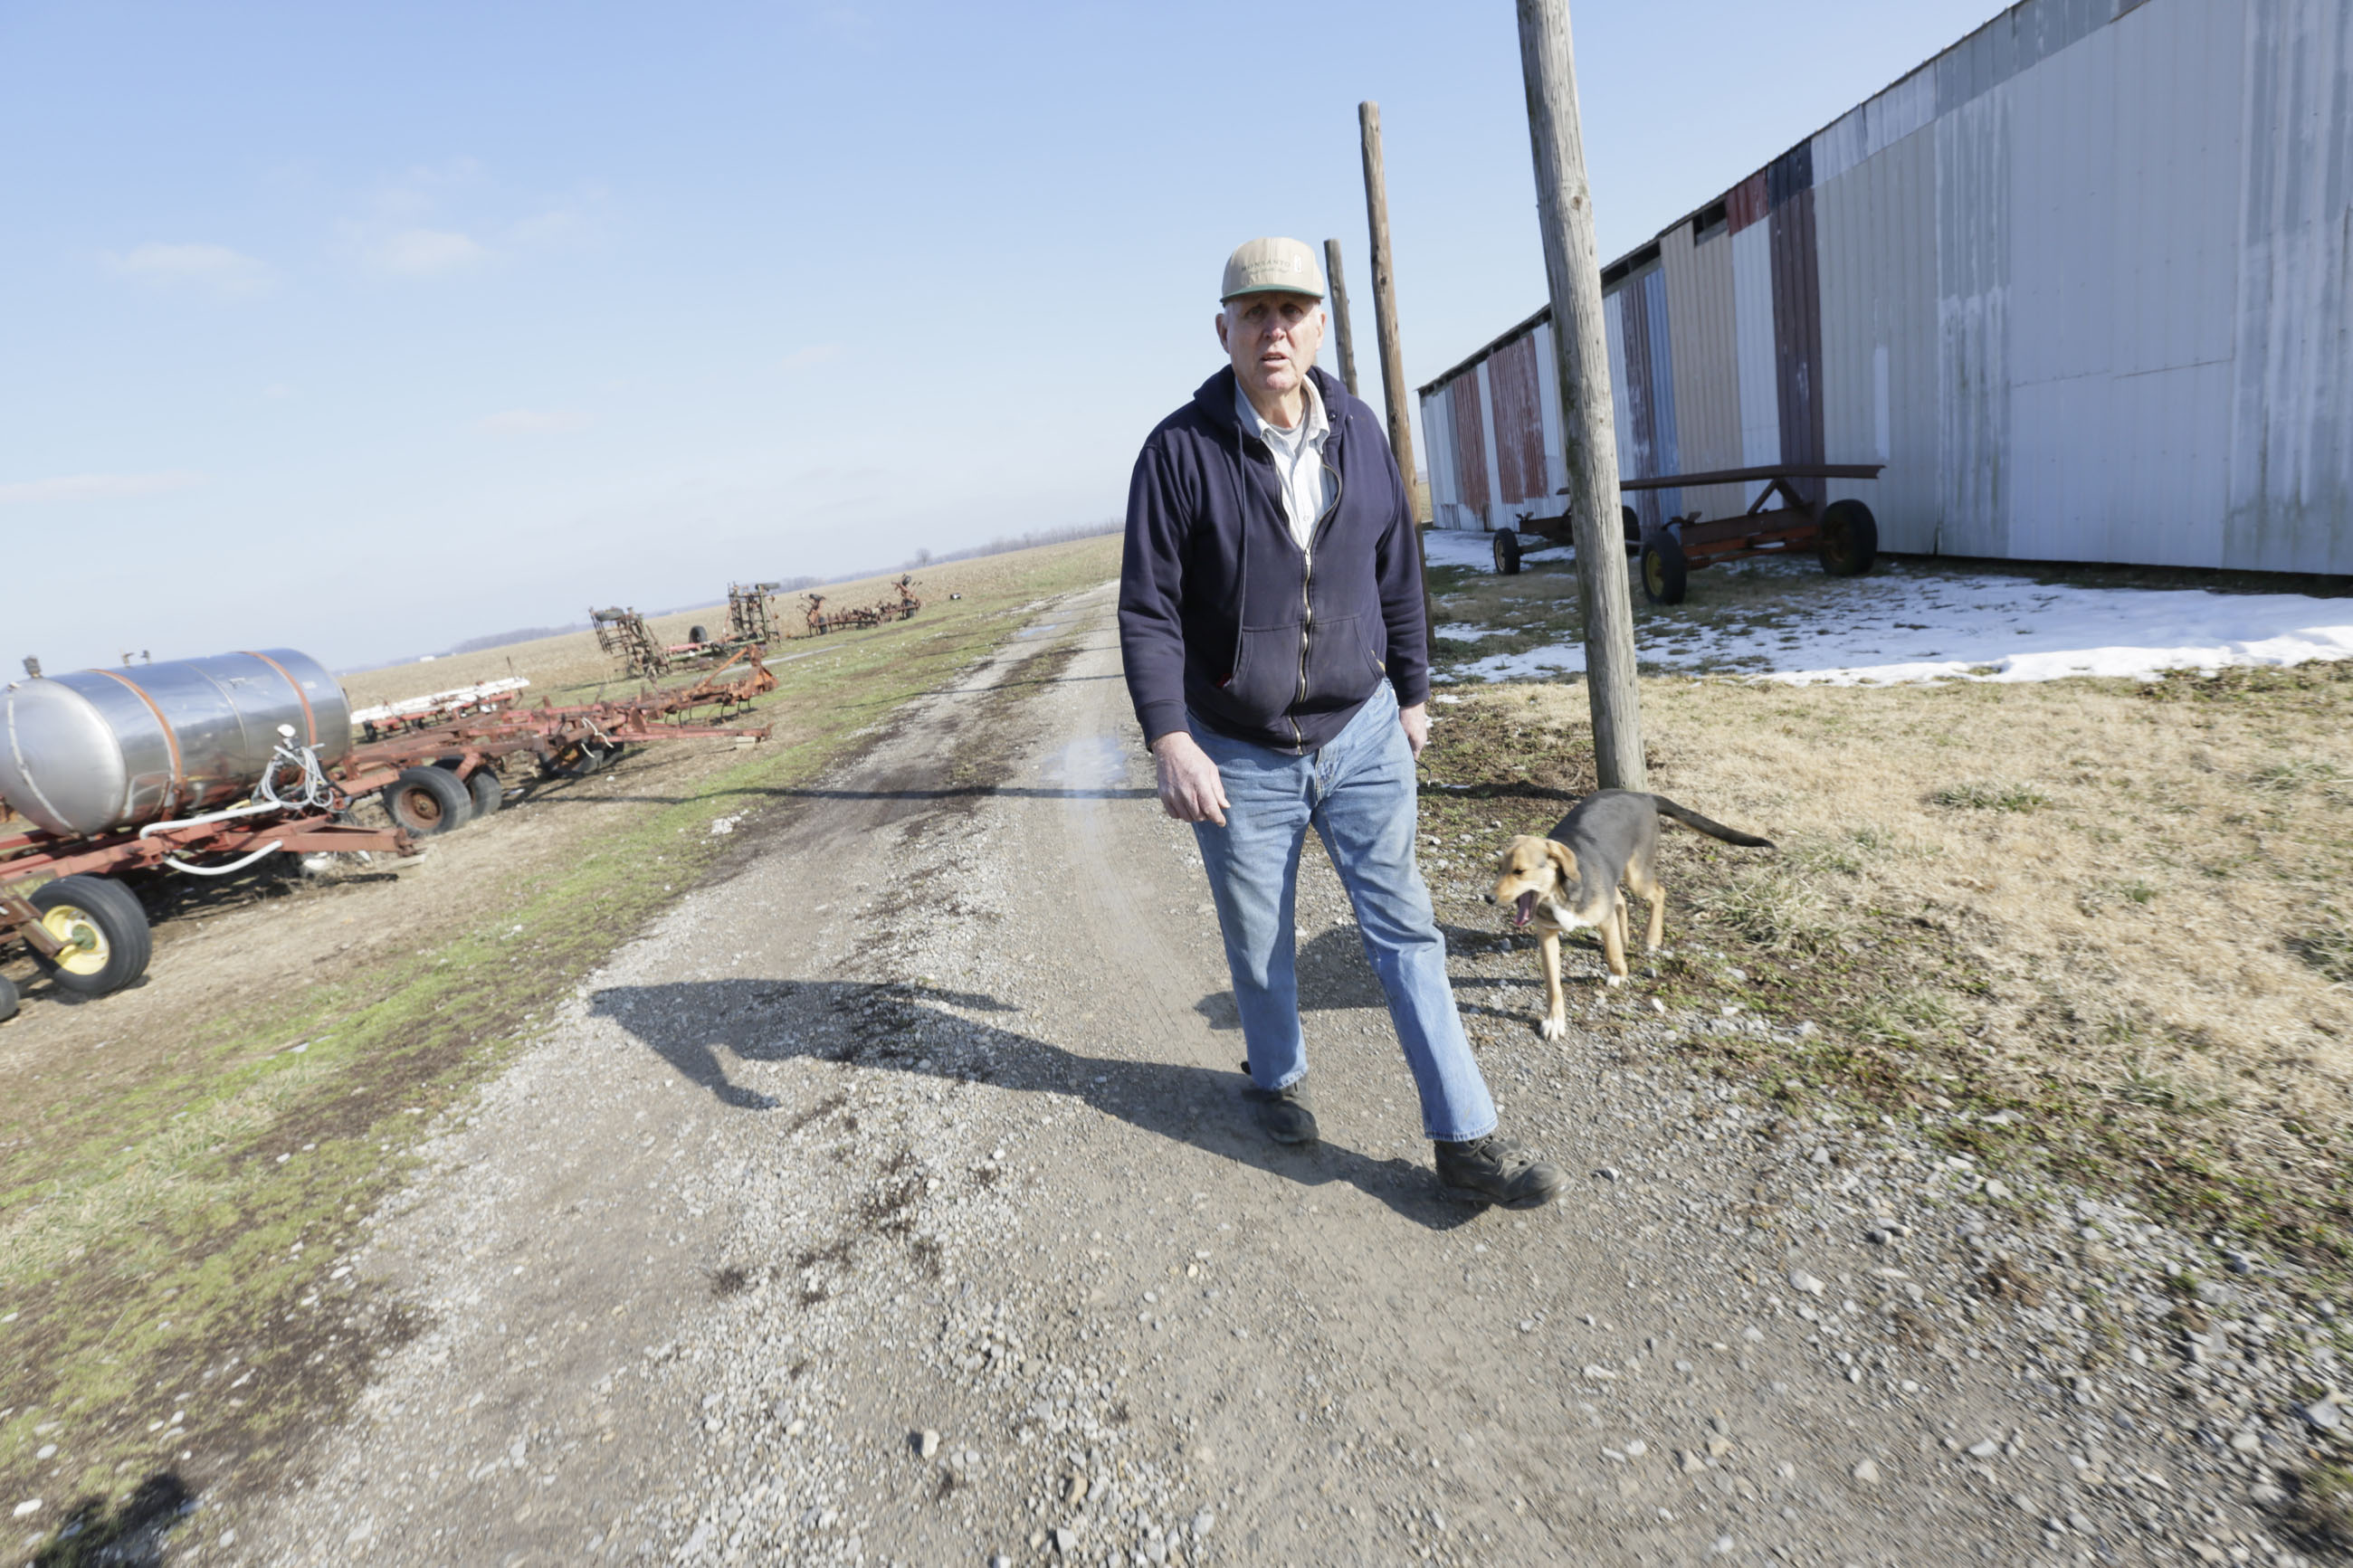 Bean to pick: Hugh Bowman of Sandborn, Indiana, is among the 94 percent of soybean farmers in the state who grow Monsanto's Roundup Ready beans. | THE WASHINGTON POST